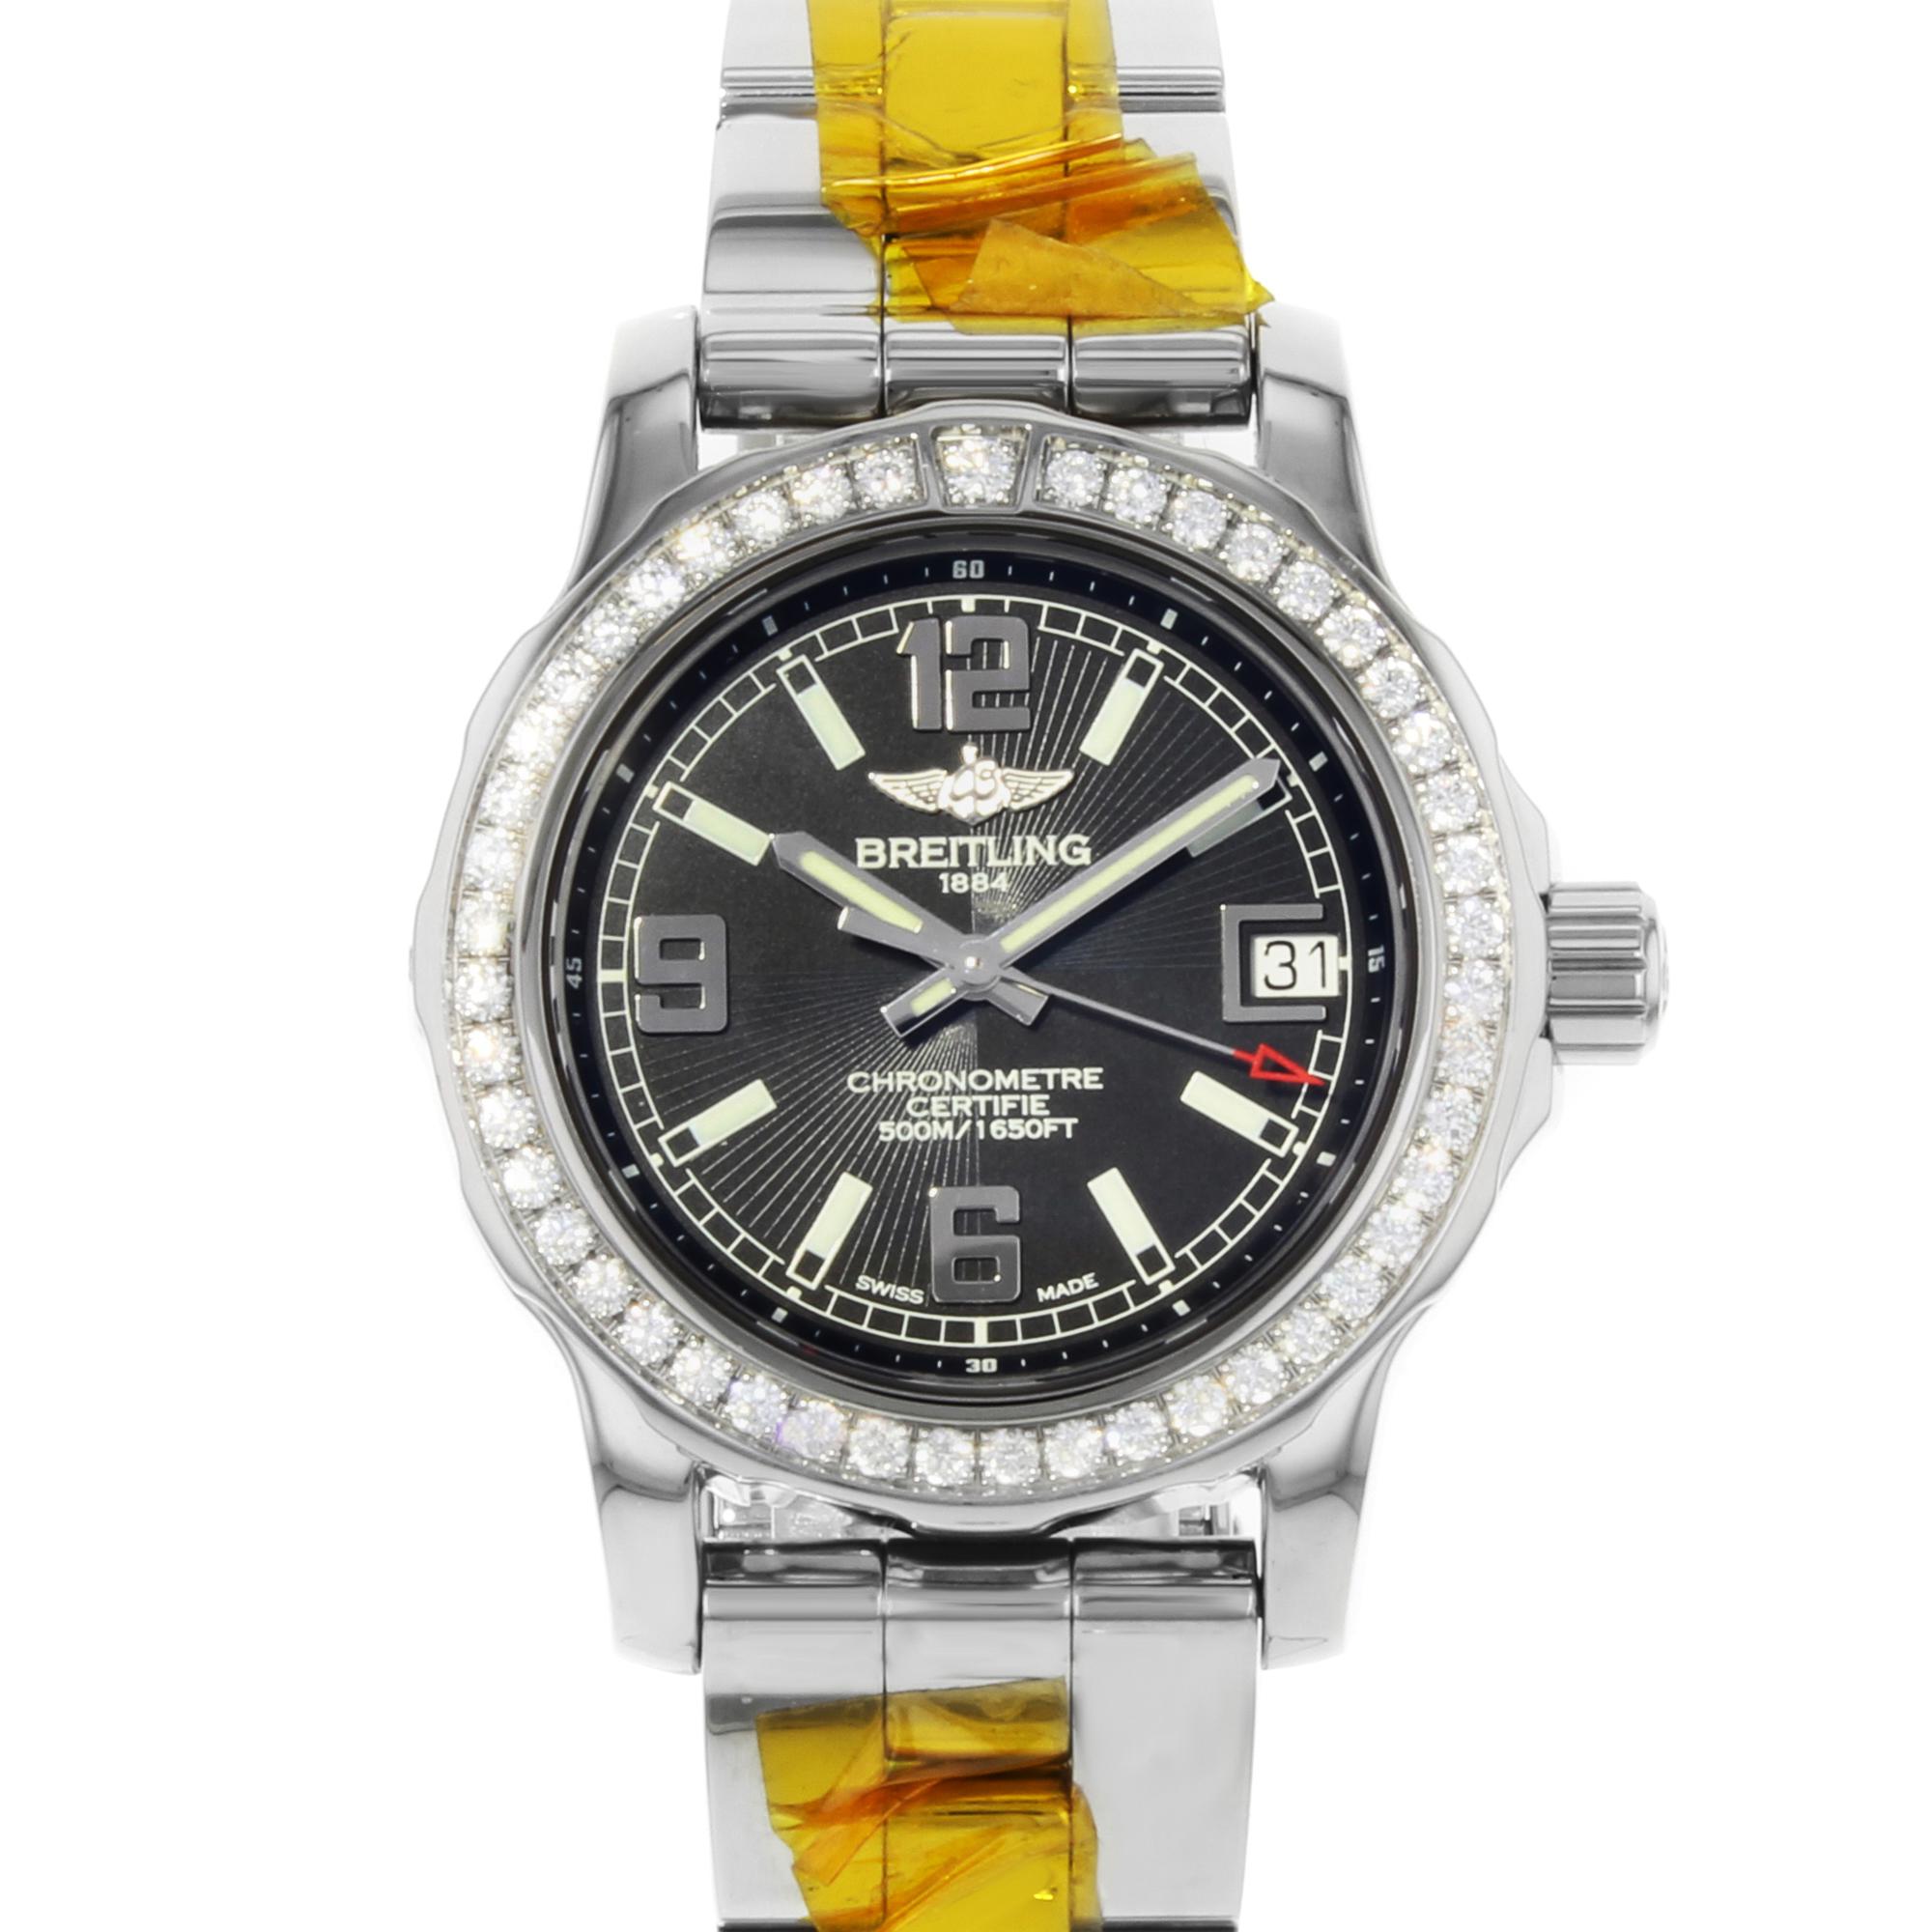 This display model Breitling Colt A7738753/BB51-158A is a beautiful Ladies timepiece that is powered by a quartz movement which is cased in a stainless steel case. It has a round shape face, date dial, and has hand sticks & numerals style markers.